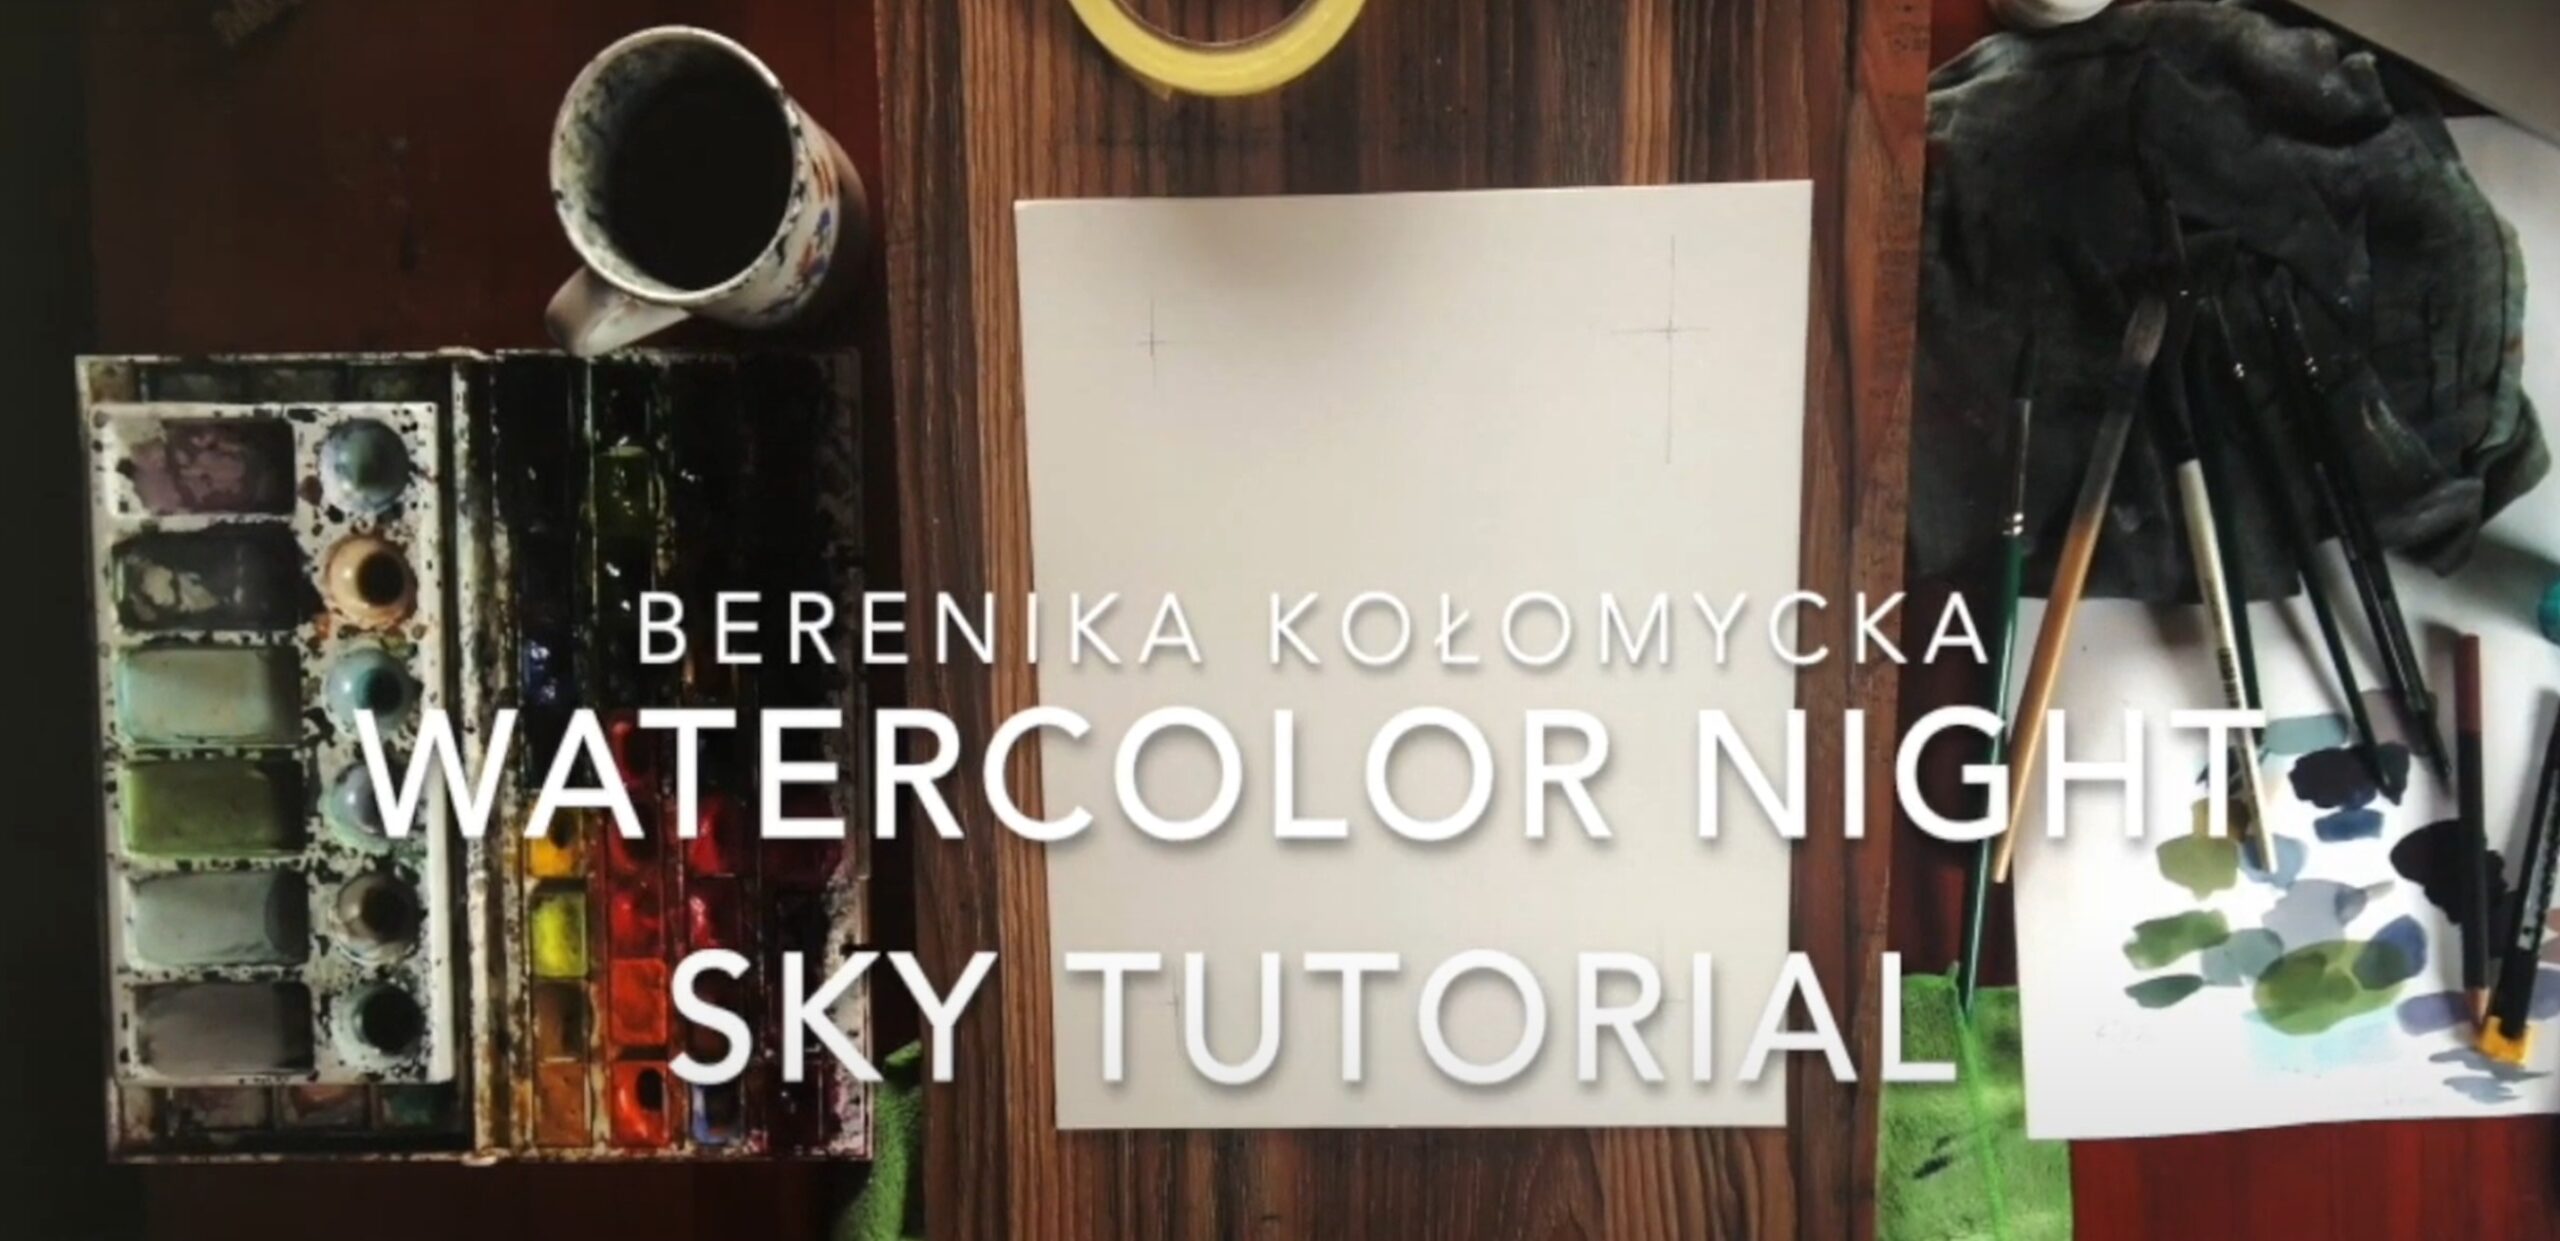 You are currently viewing Night Sky Watercolour Tutorial with Berenika Kołomycka